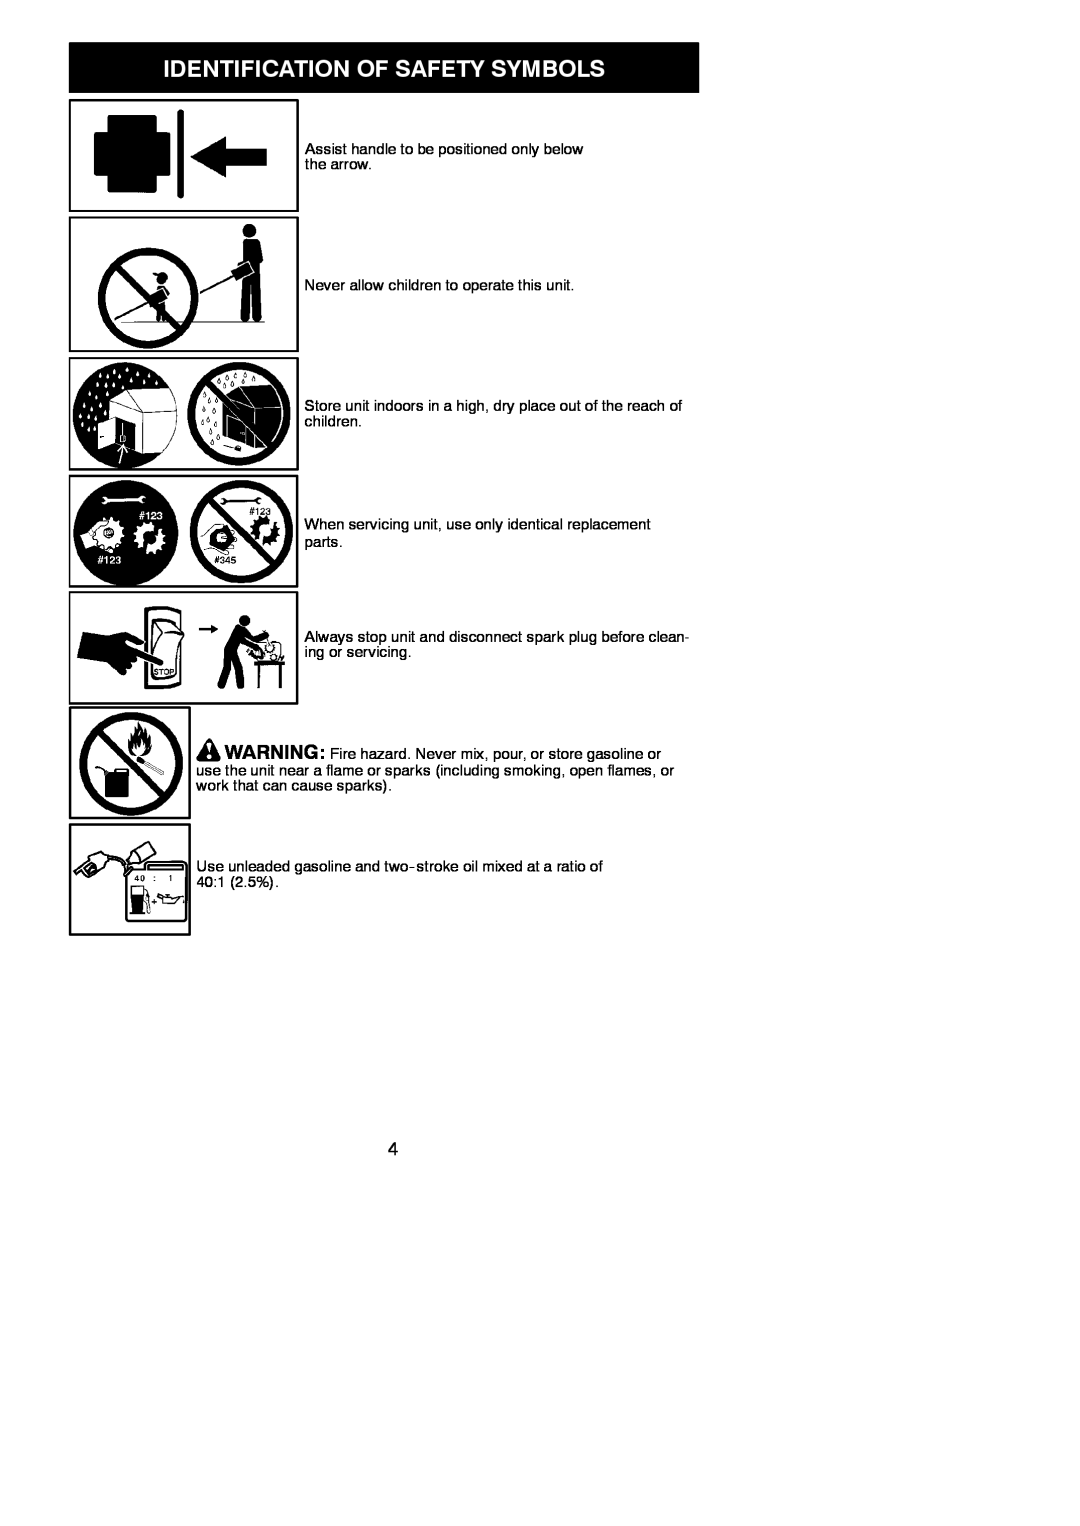 Poulan PP338PT, 115224926 Identification Of Safety Symbols, Assist handle to be positioned only below the arrow 